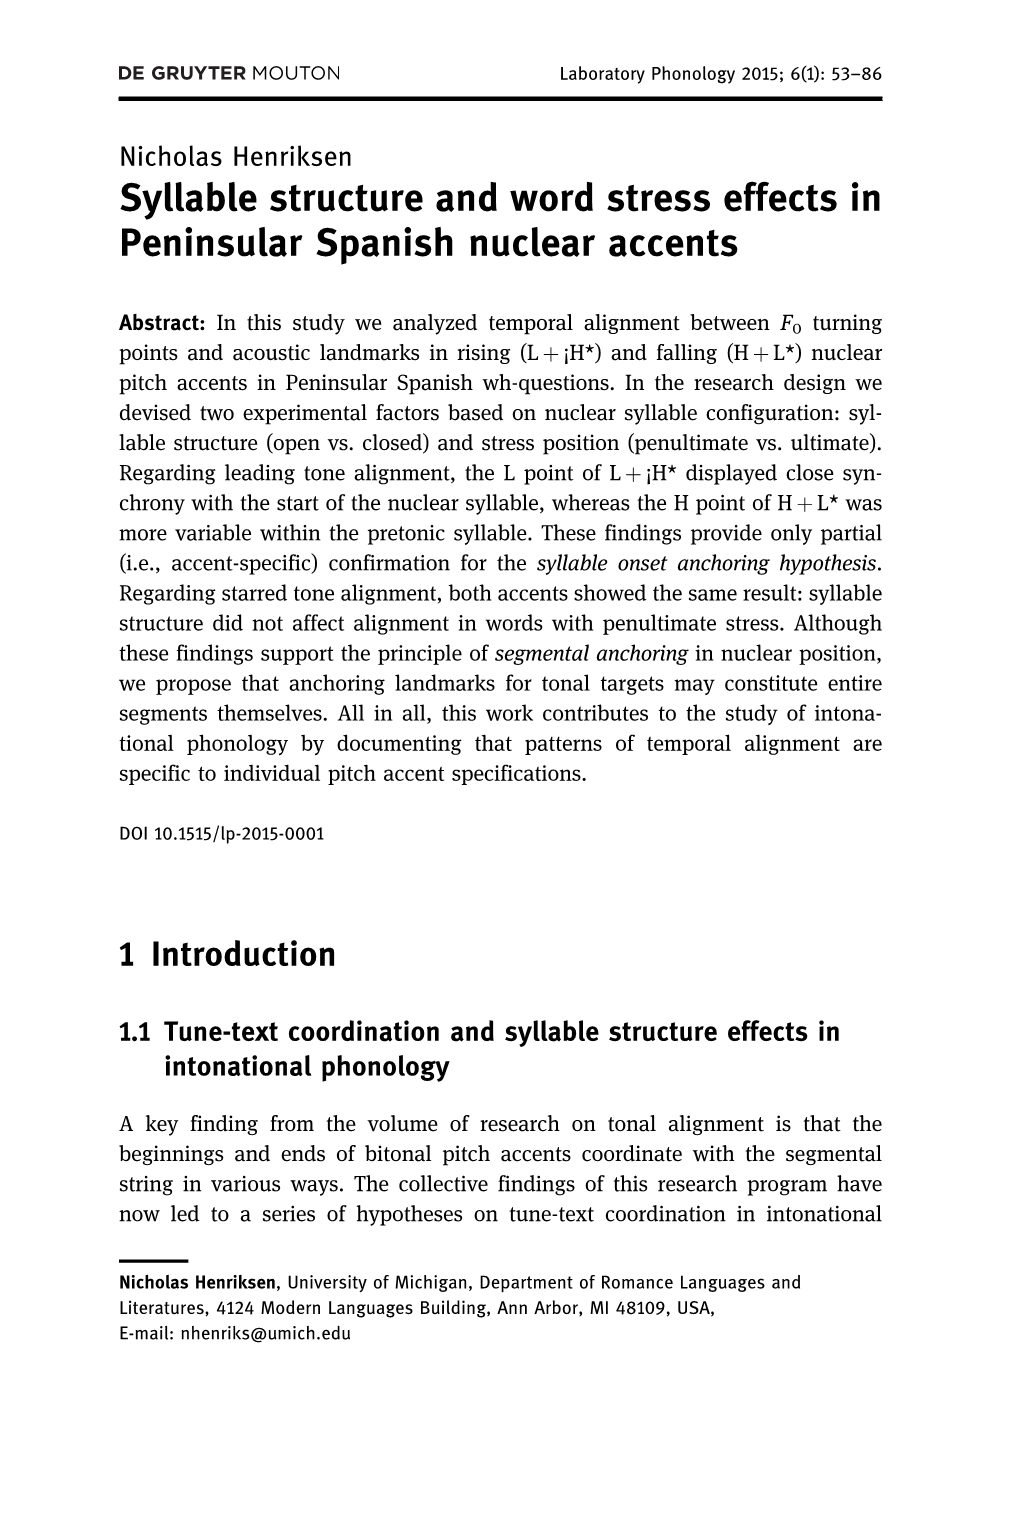 Syllable Structure and Word Stress Effects in Peninsular Spanish Nuclear Accents